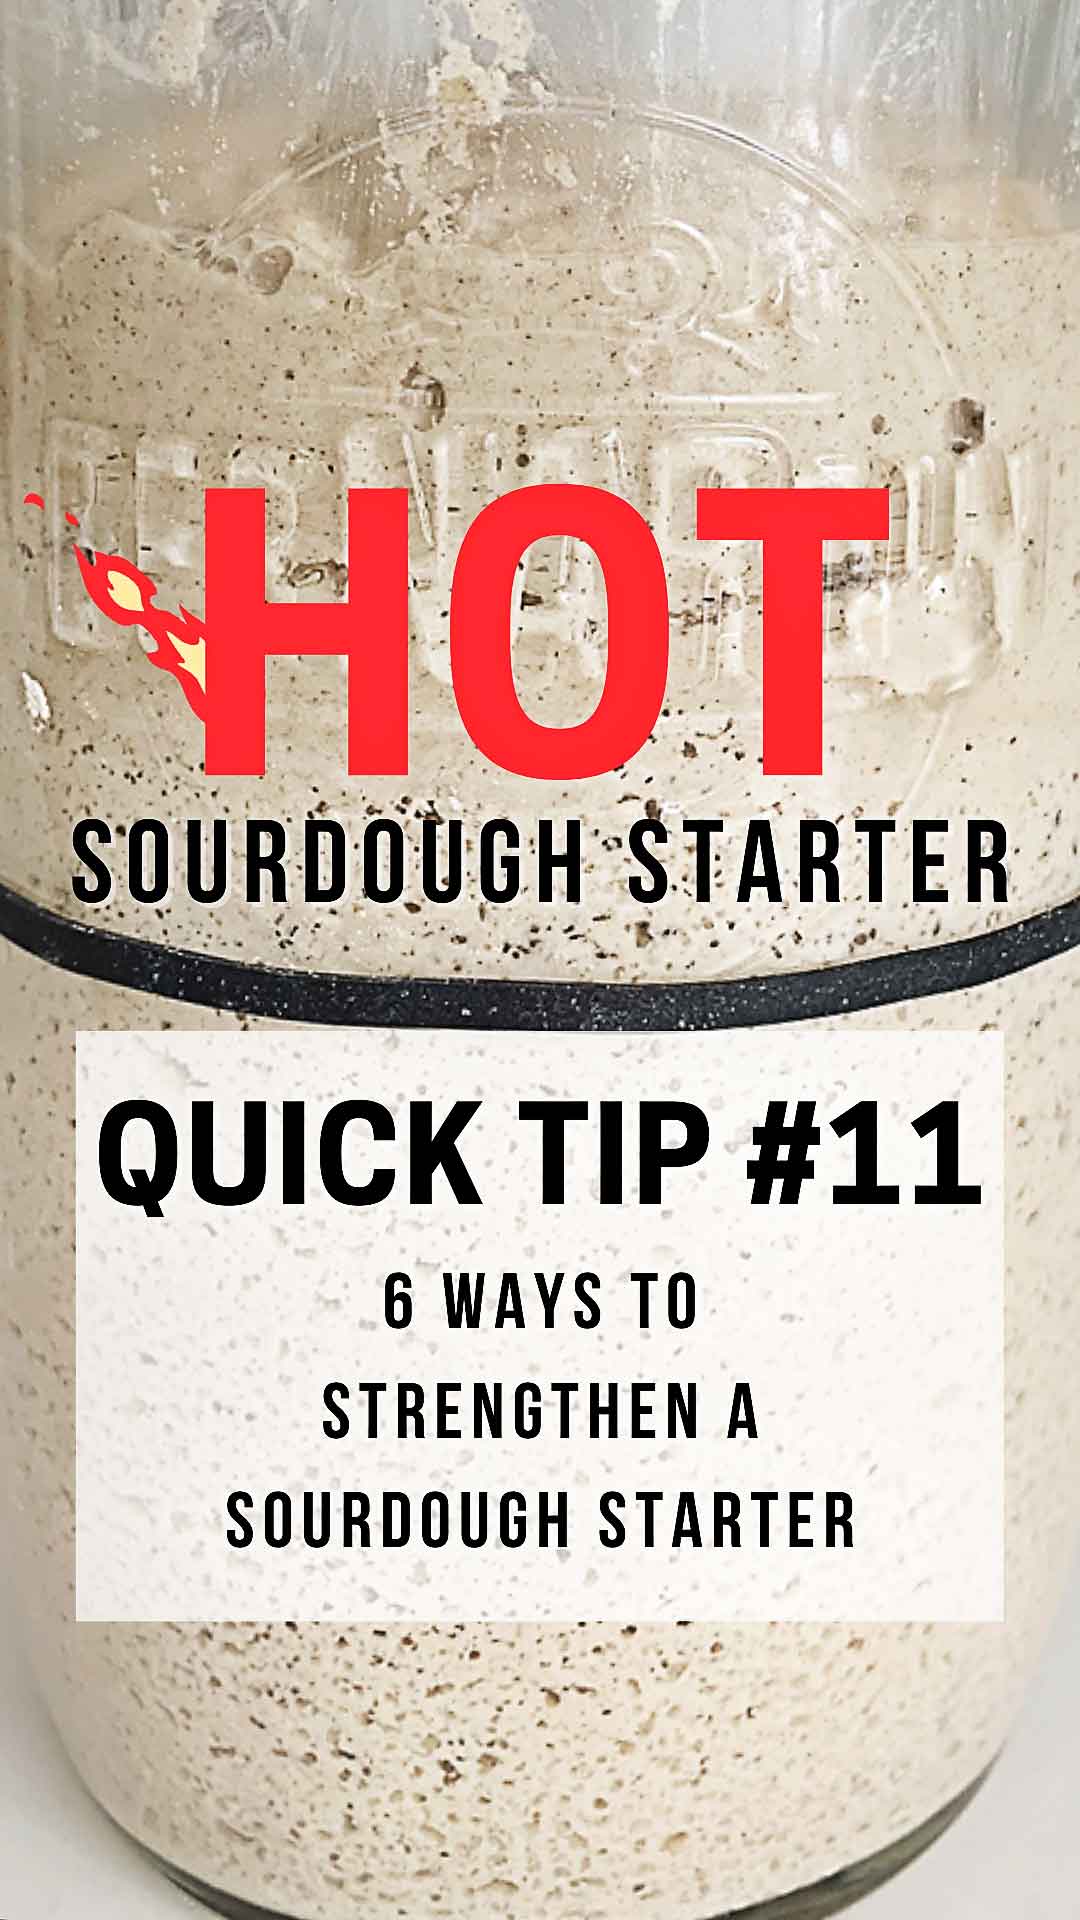 Going on vacation? Have a new sourdough starter? Need a break from your starter? In this quick tip learn 6 ways to strengthen your sourdough starter that will work for all of these situations! Give your sourdough starter a boost!